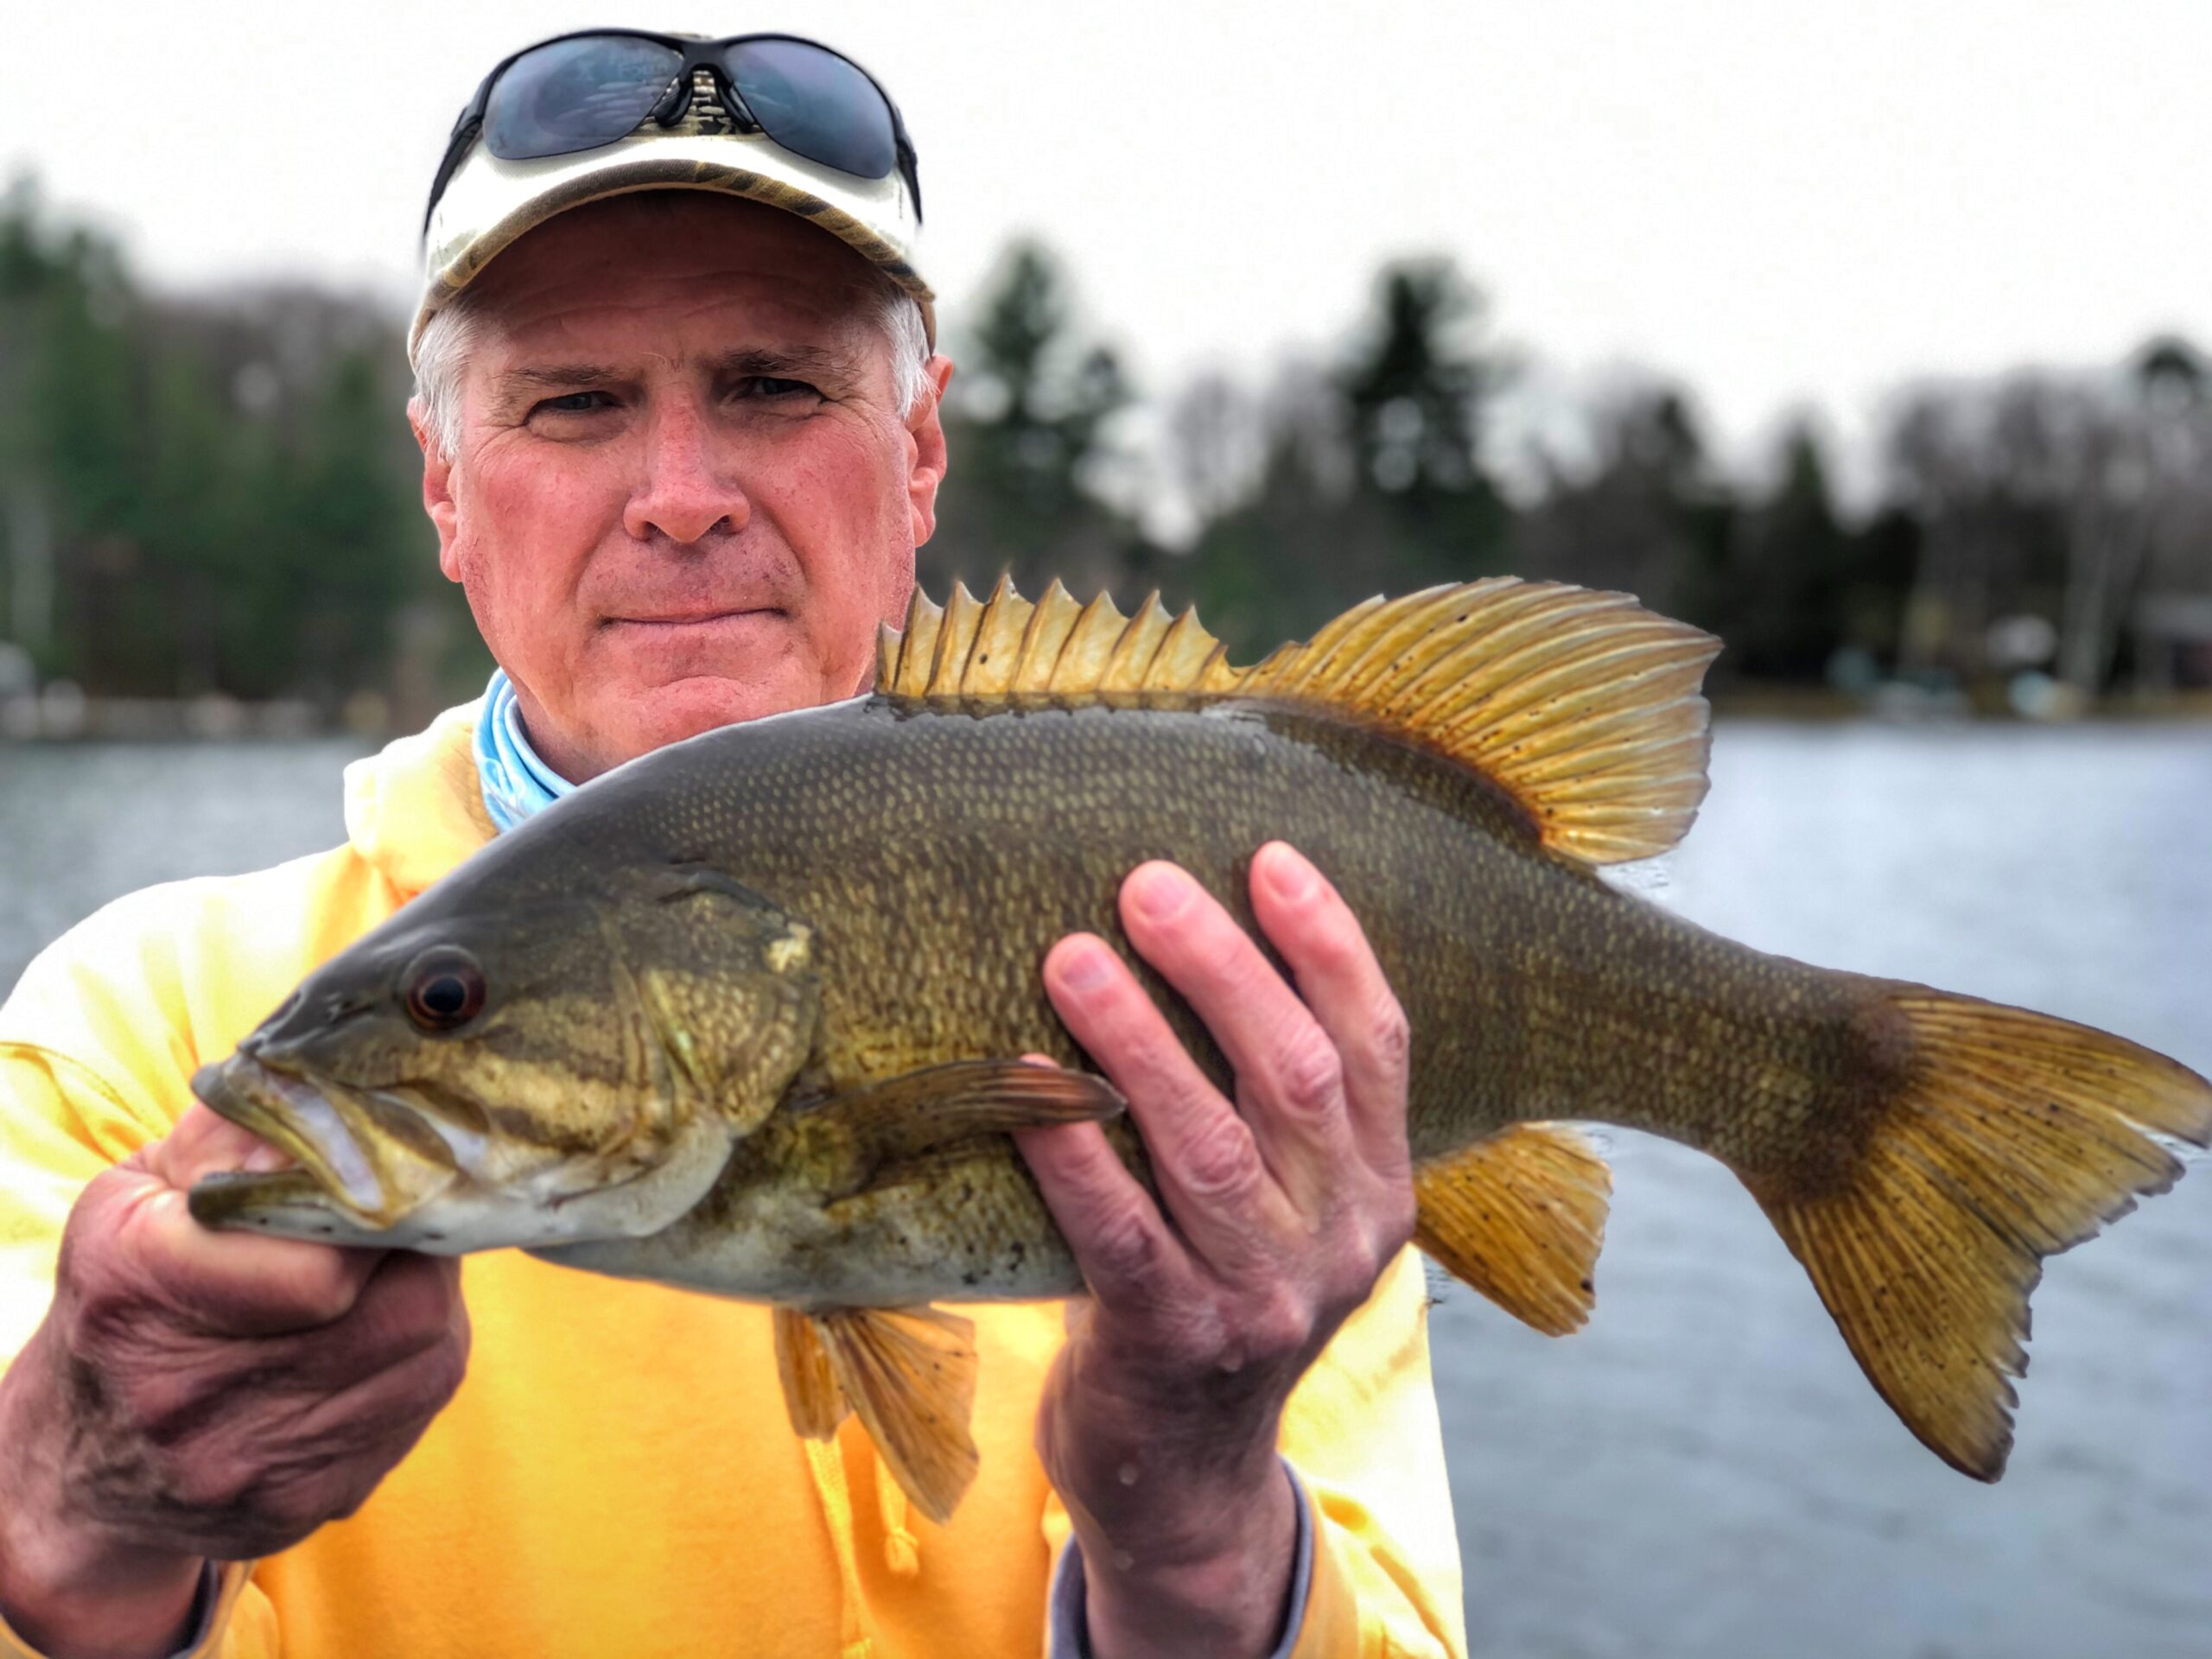 Northwoods Bass Fishing Report - Early May, 2021